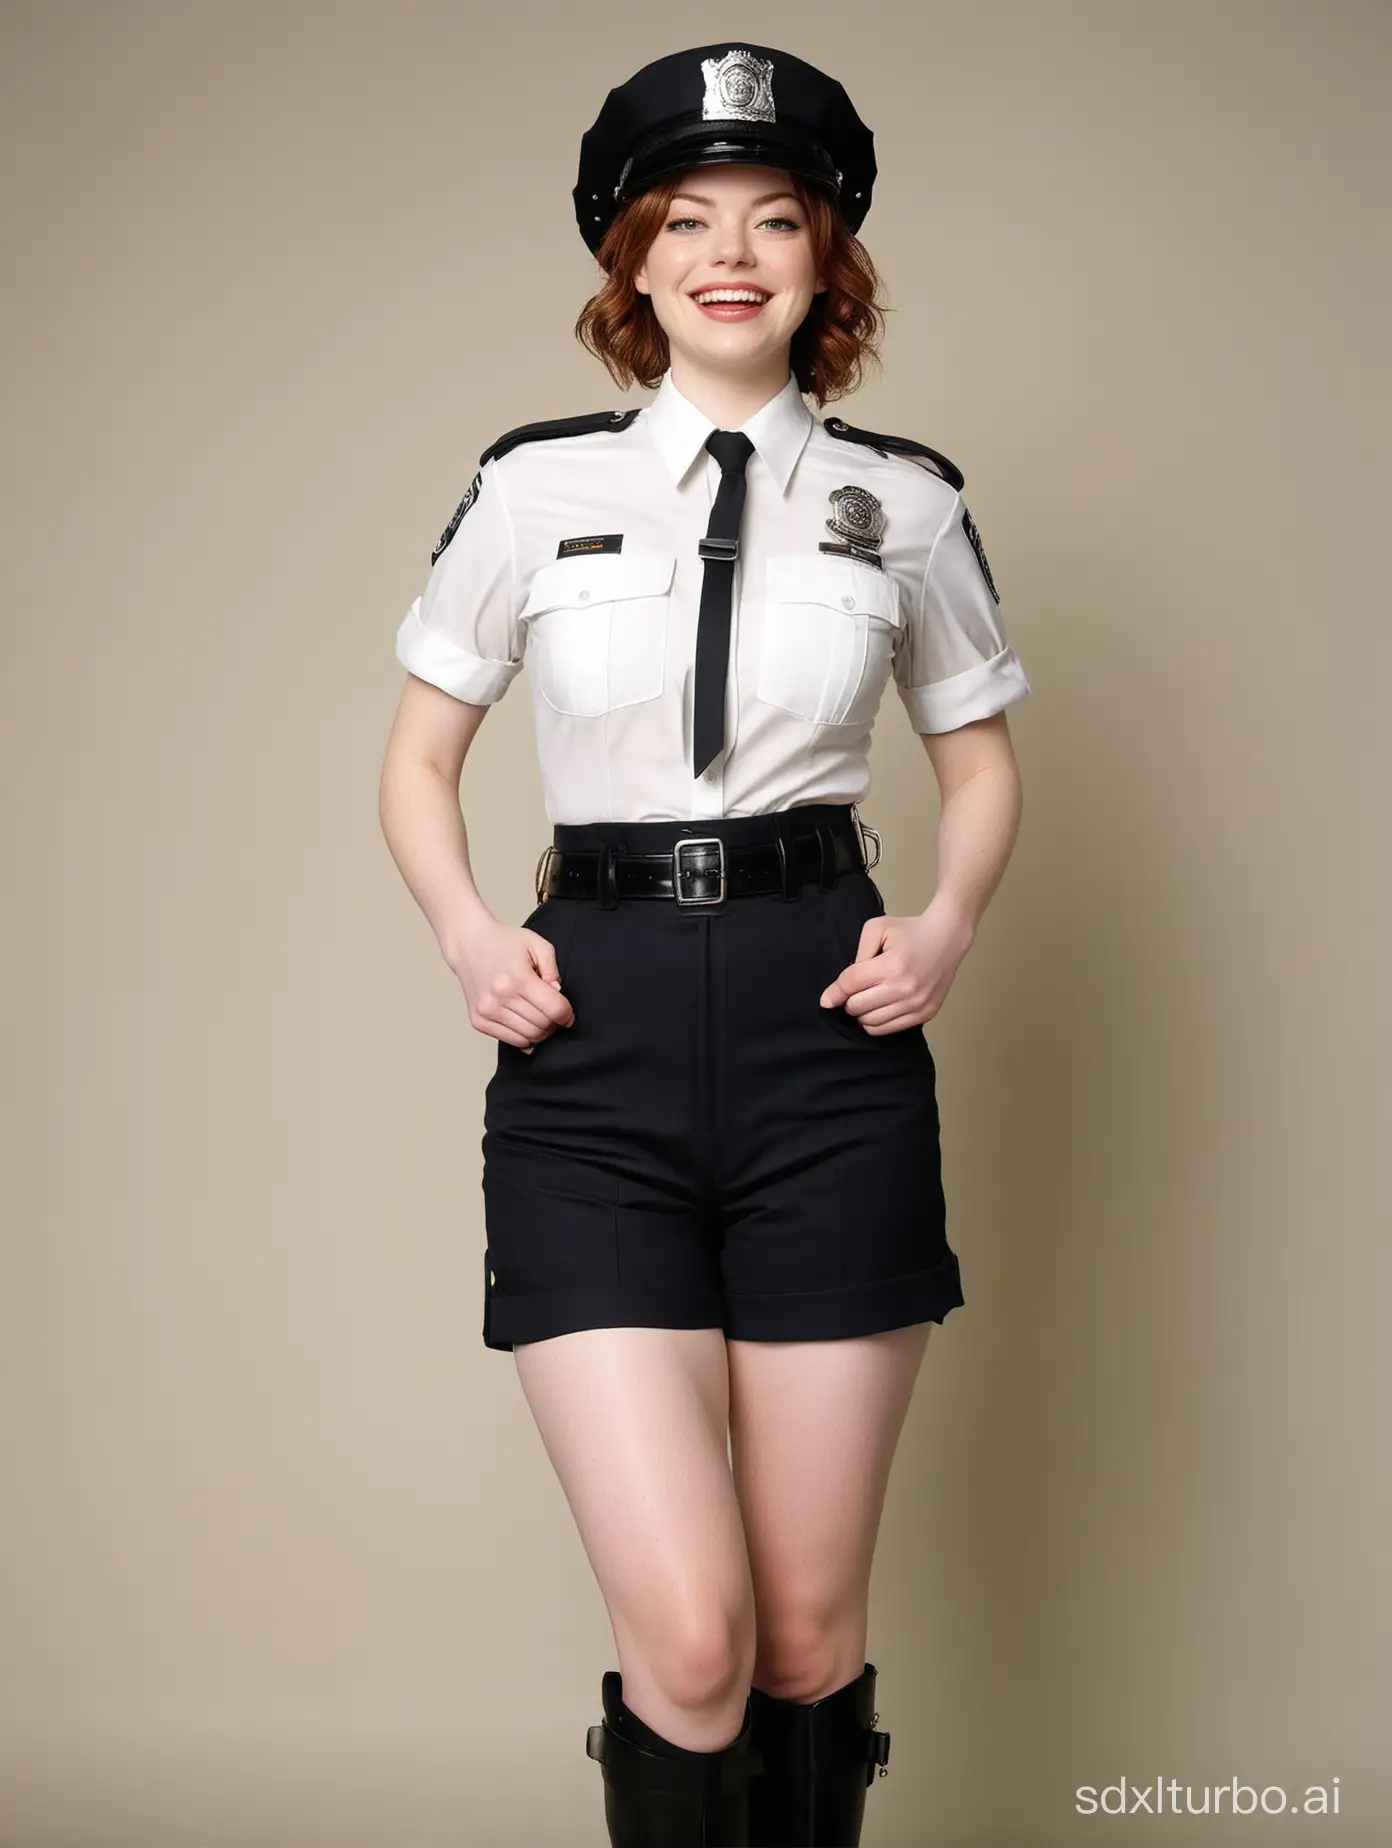 Laughing-Woman-in-Police-Officer-Uniform-by-Loretta-Lux